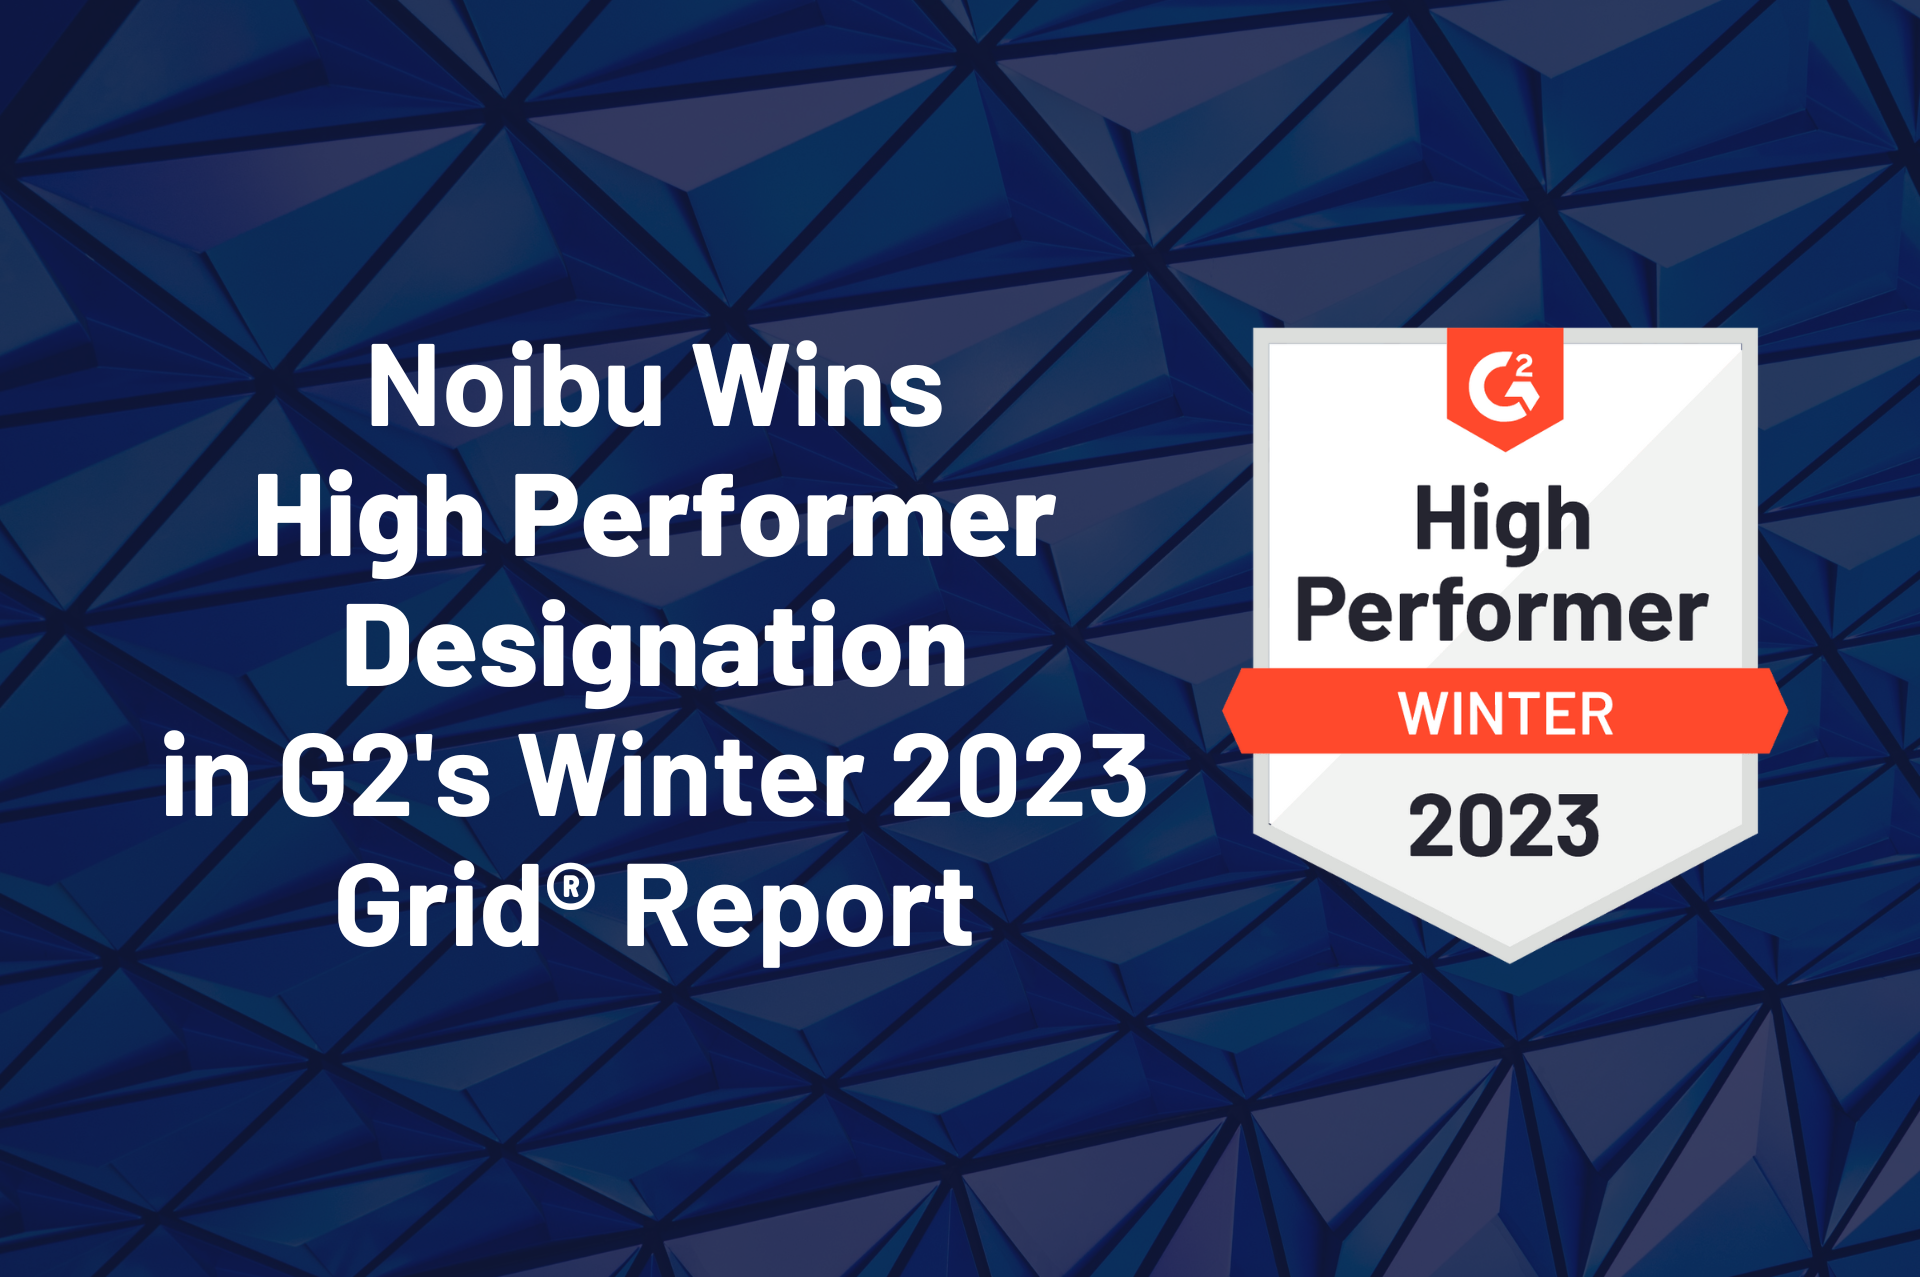 Press Release Banner: High Performance in G2's Winter 2023 Grid Report